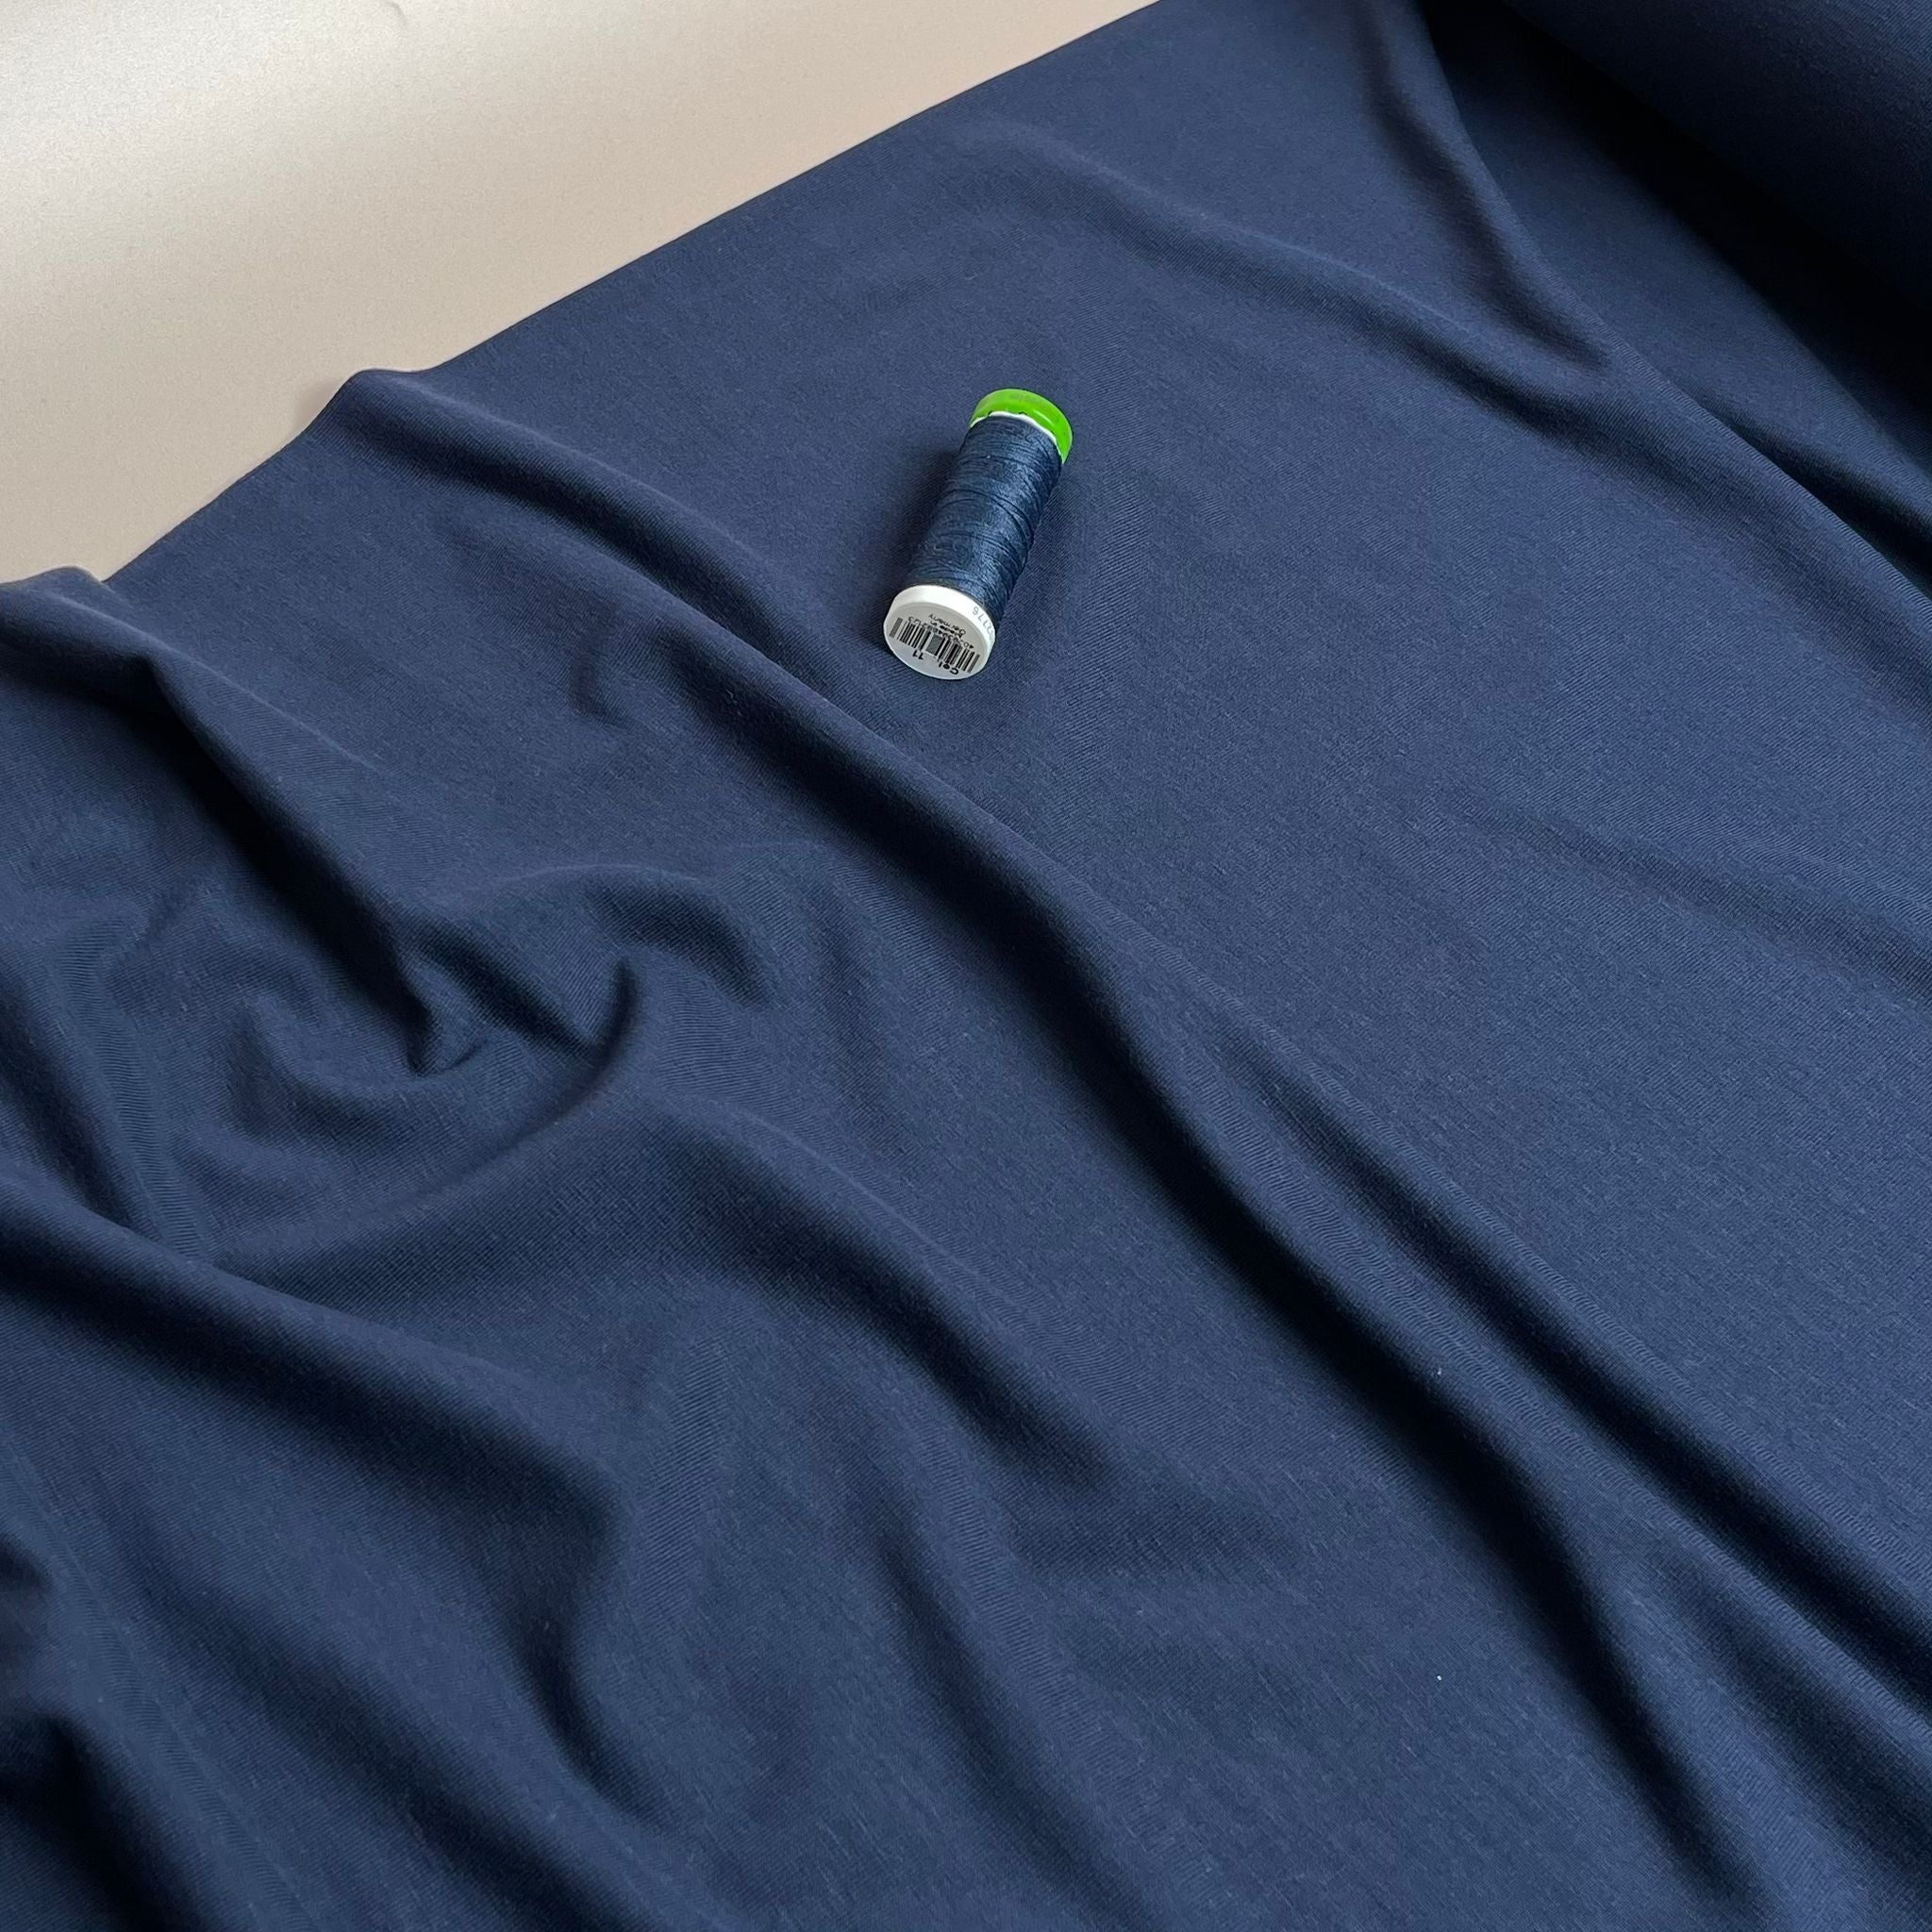 Lush in Navy Jersey Fabric with TENCEL™ Lyocell Fibres